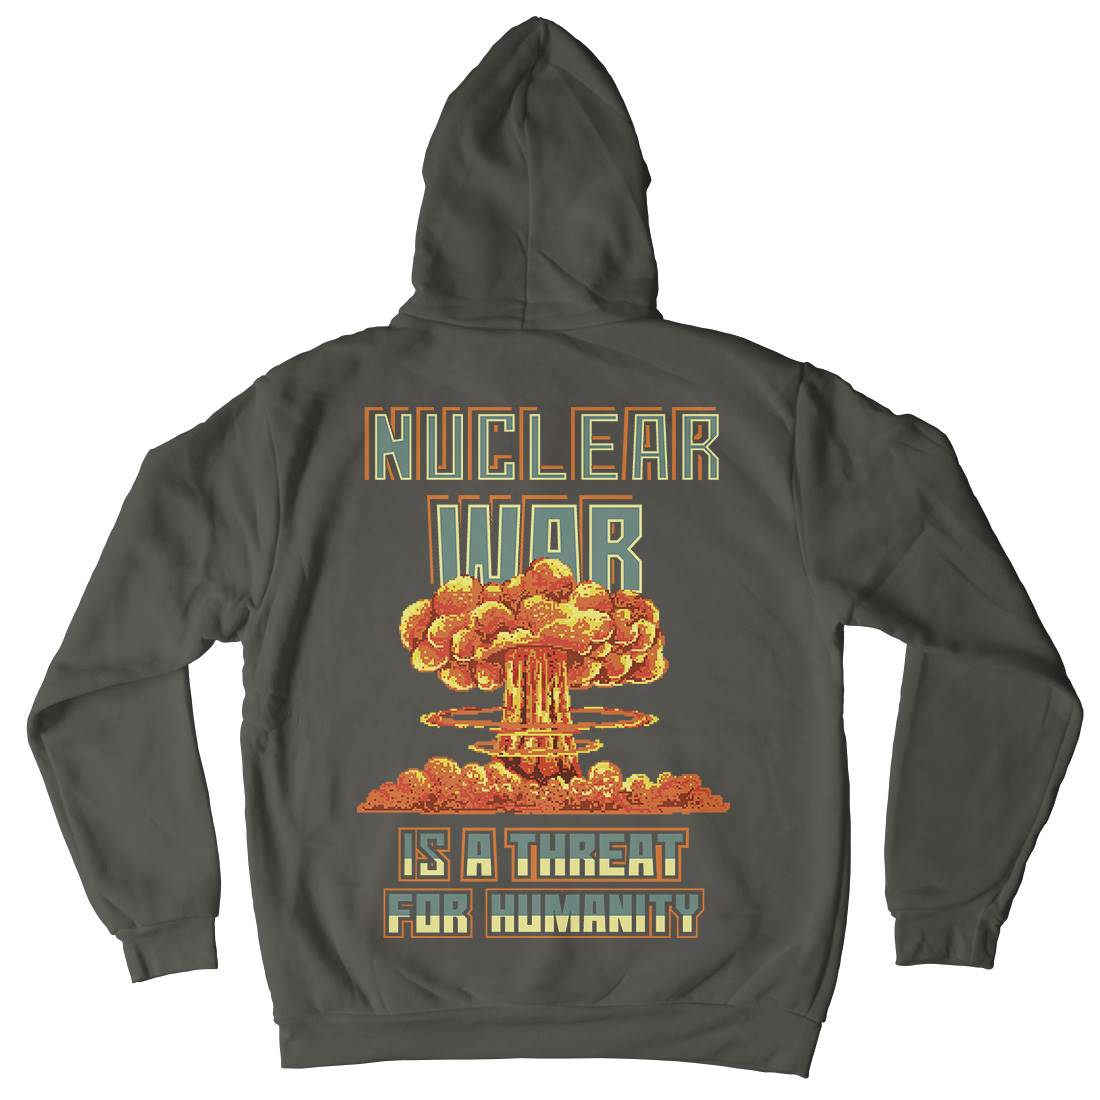 Nuclear War Is A Threat For Humanity Mens Hoodie With Pocket Army B941